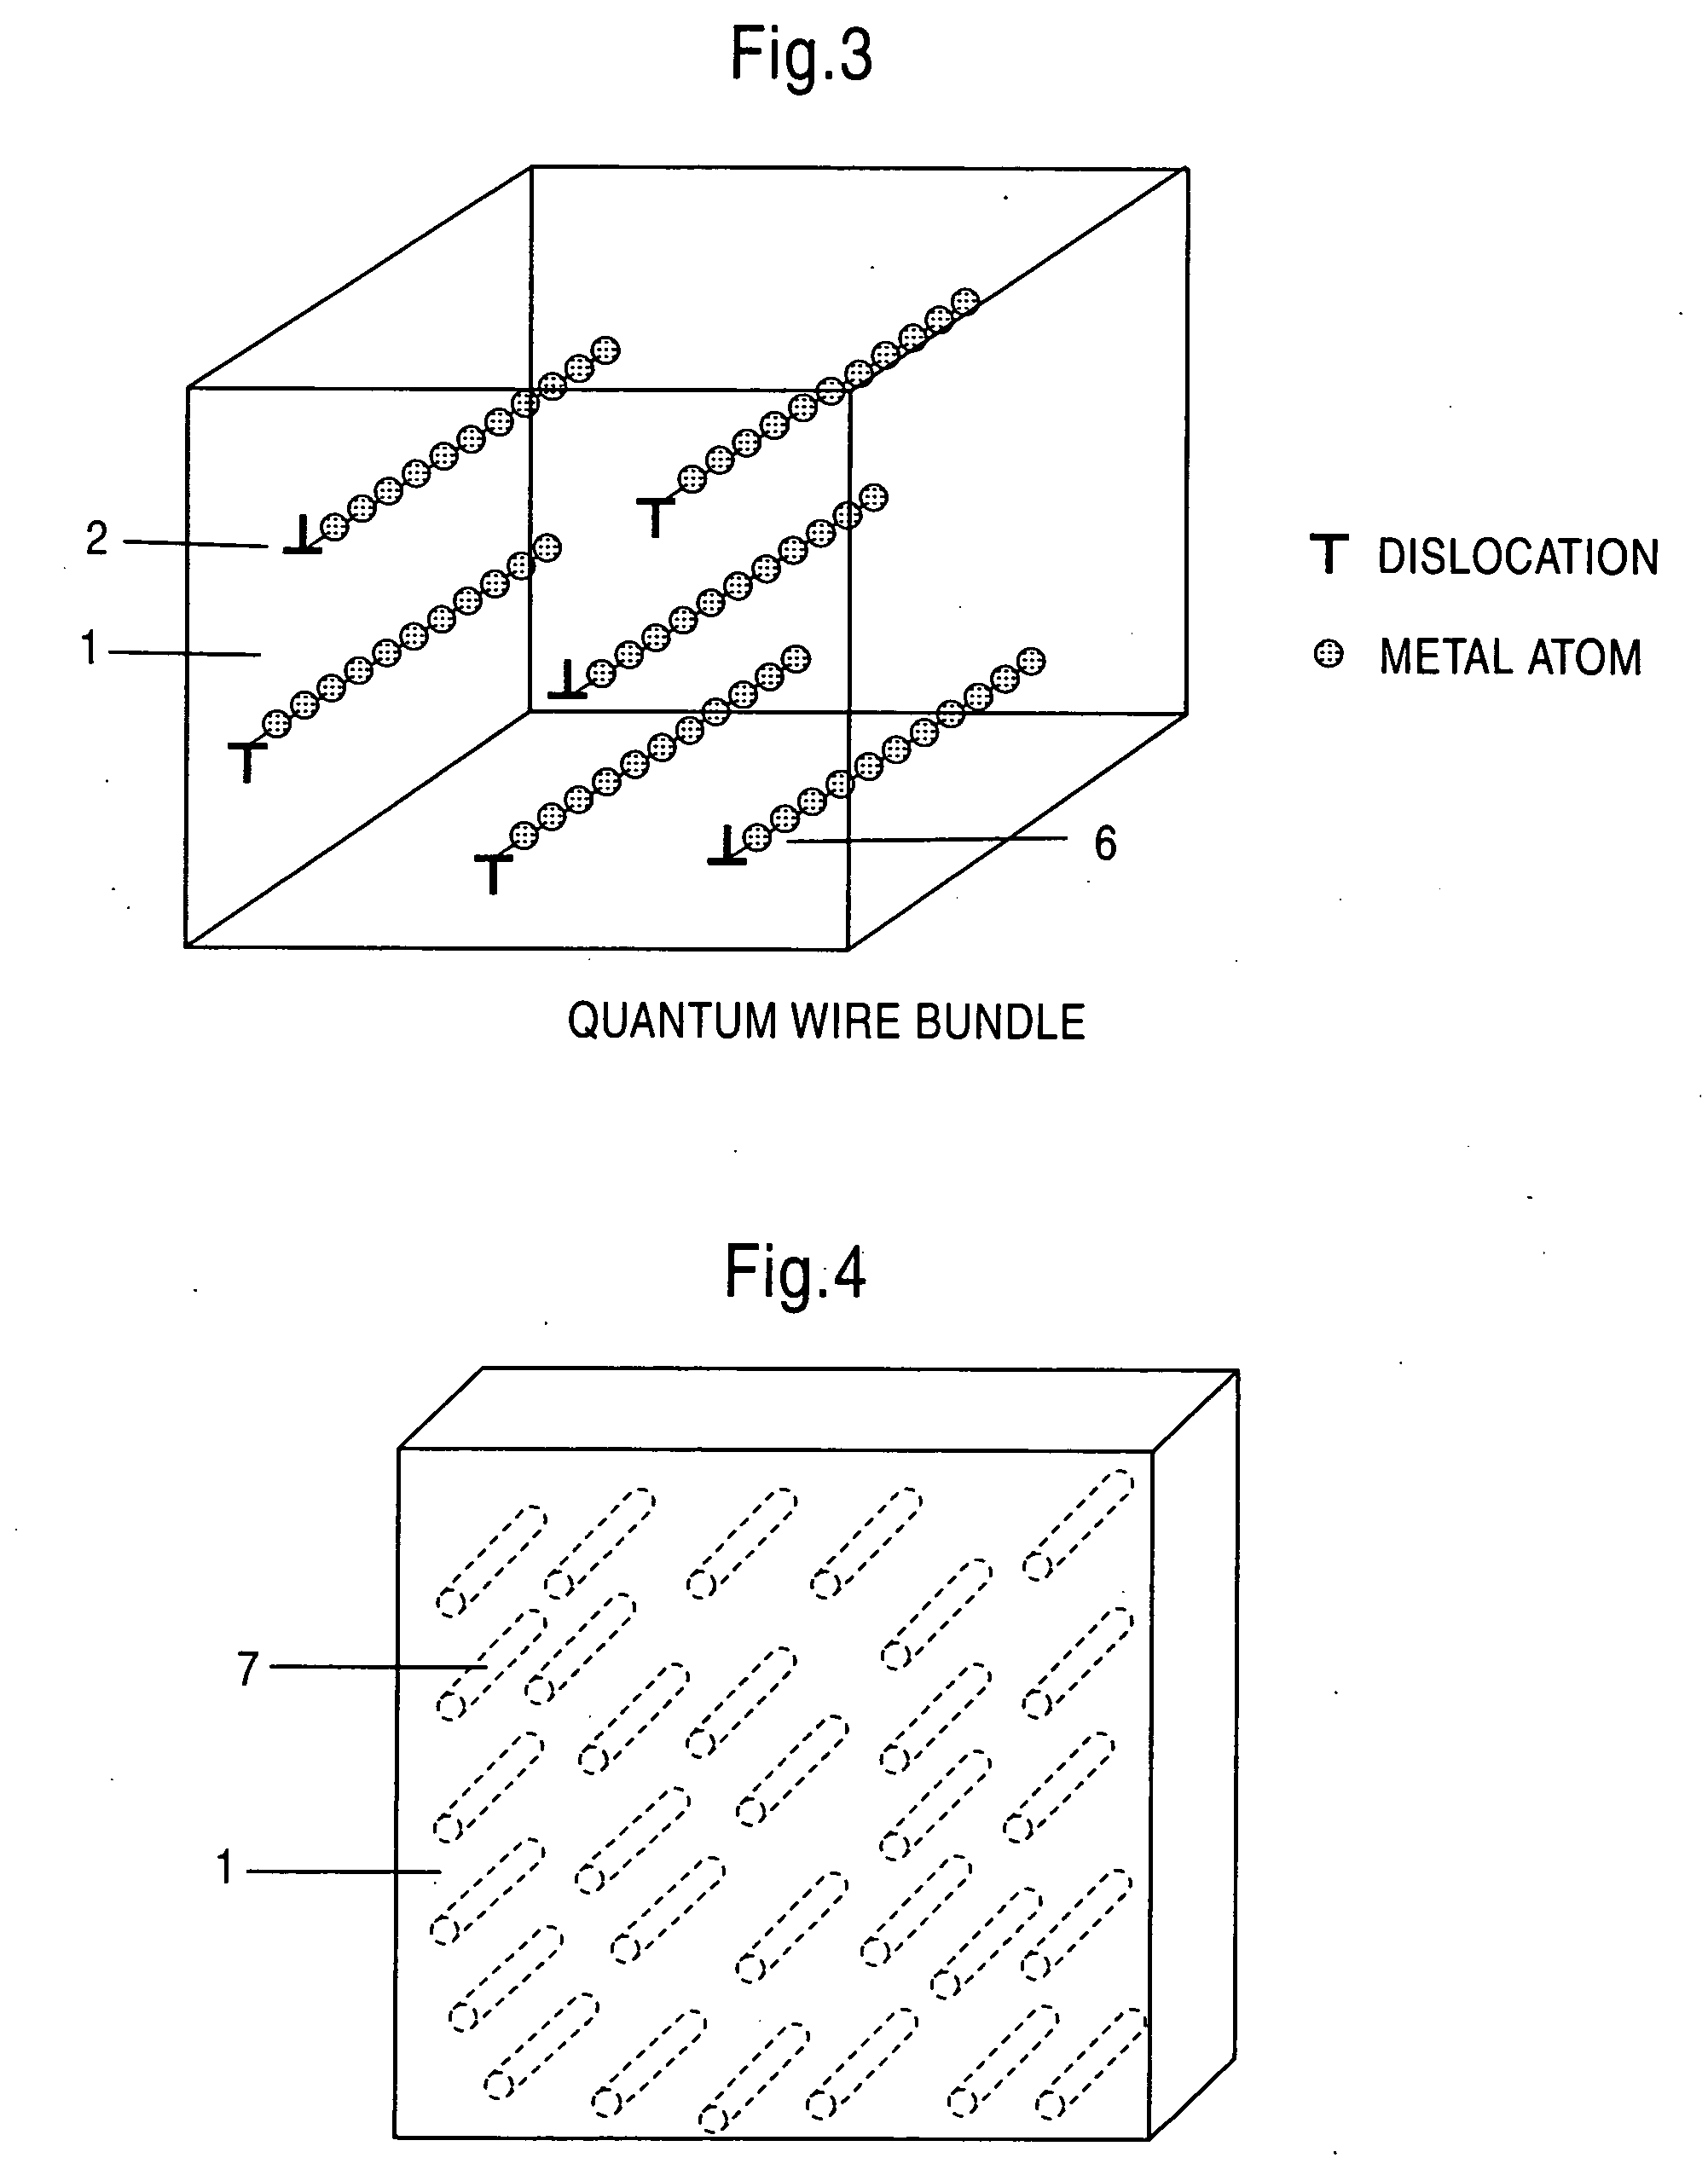 Single crystal material having high density dislocations arranged one-dimensionally in straight line form, functional device using said single crystal material, and method for their preparation